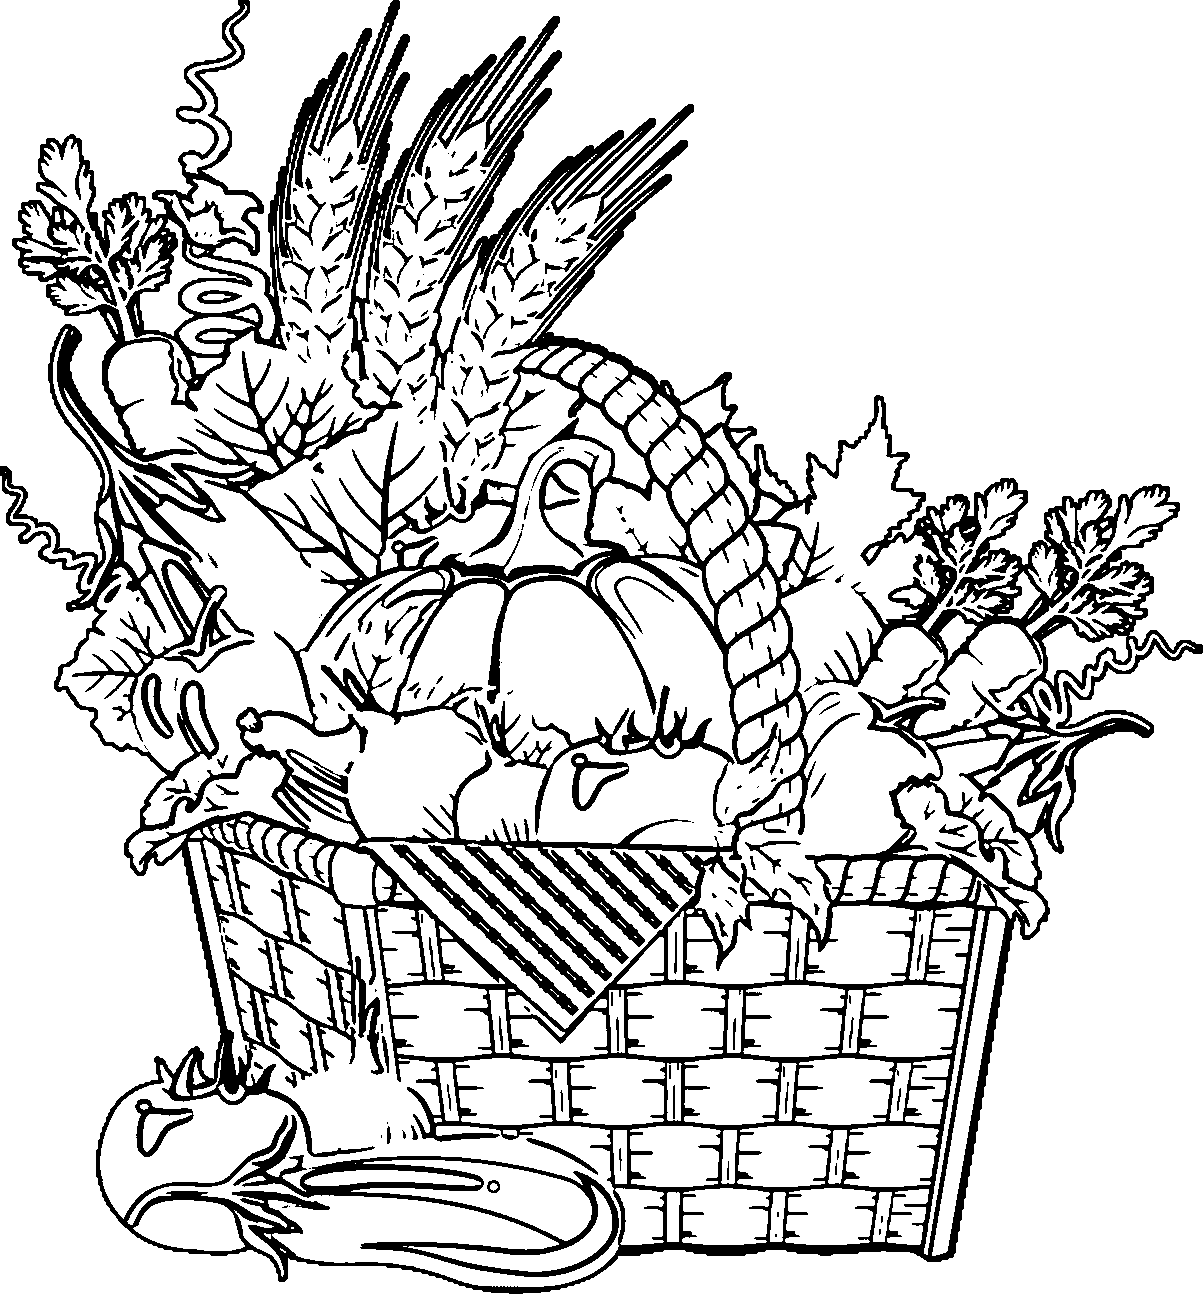 Download Free Coloring Pages of Vegetable Gardens